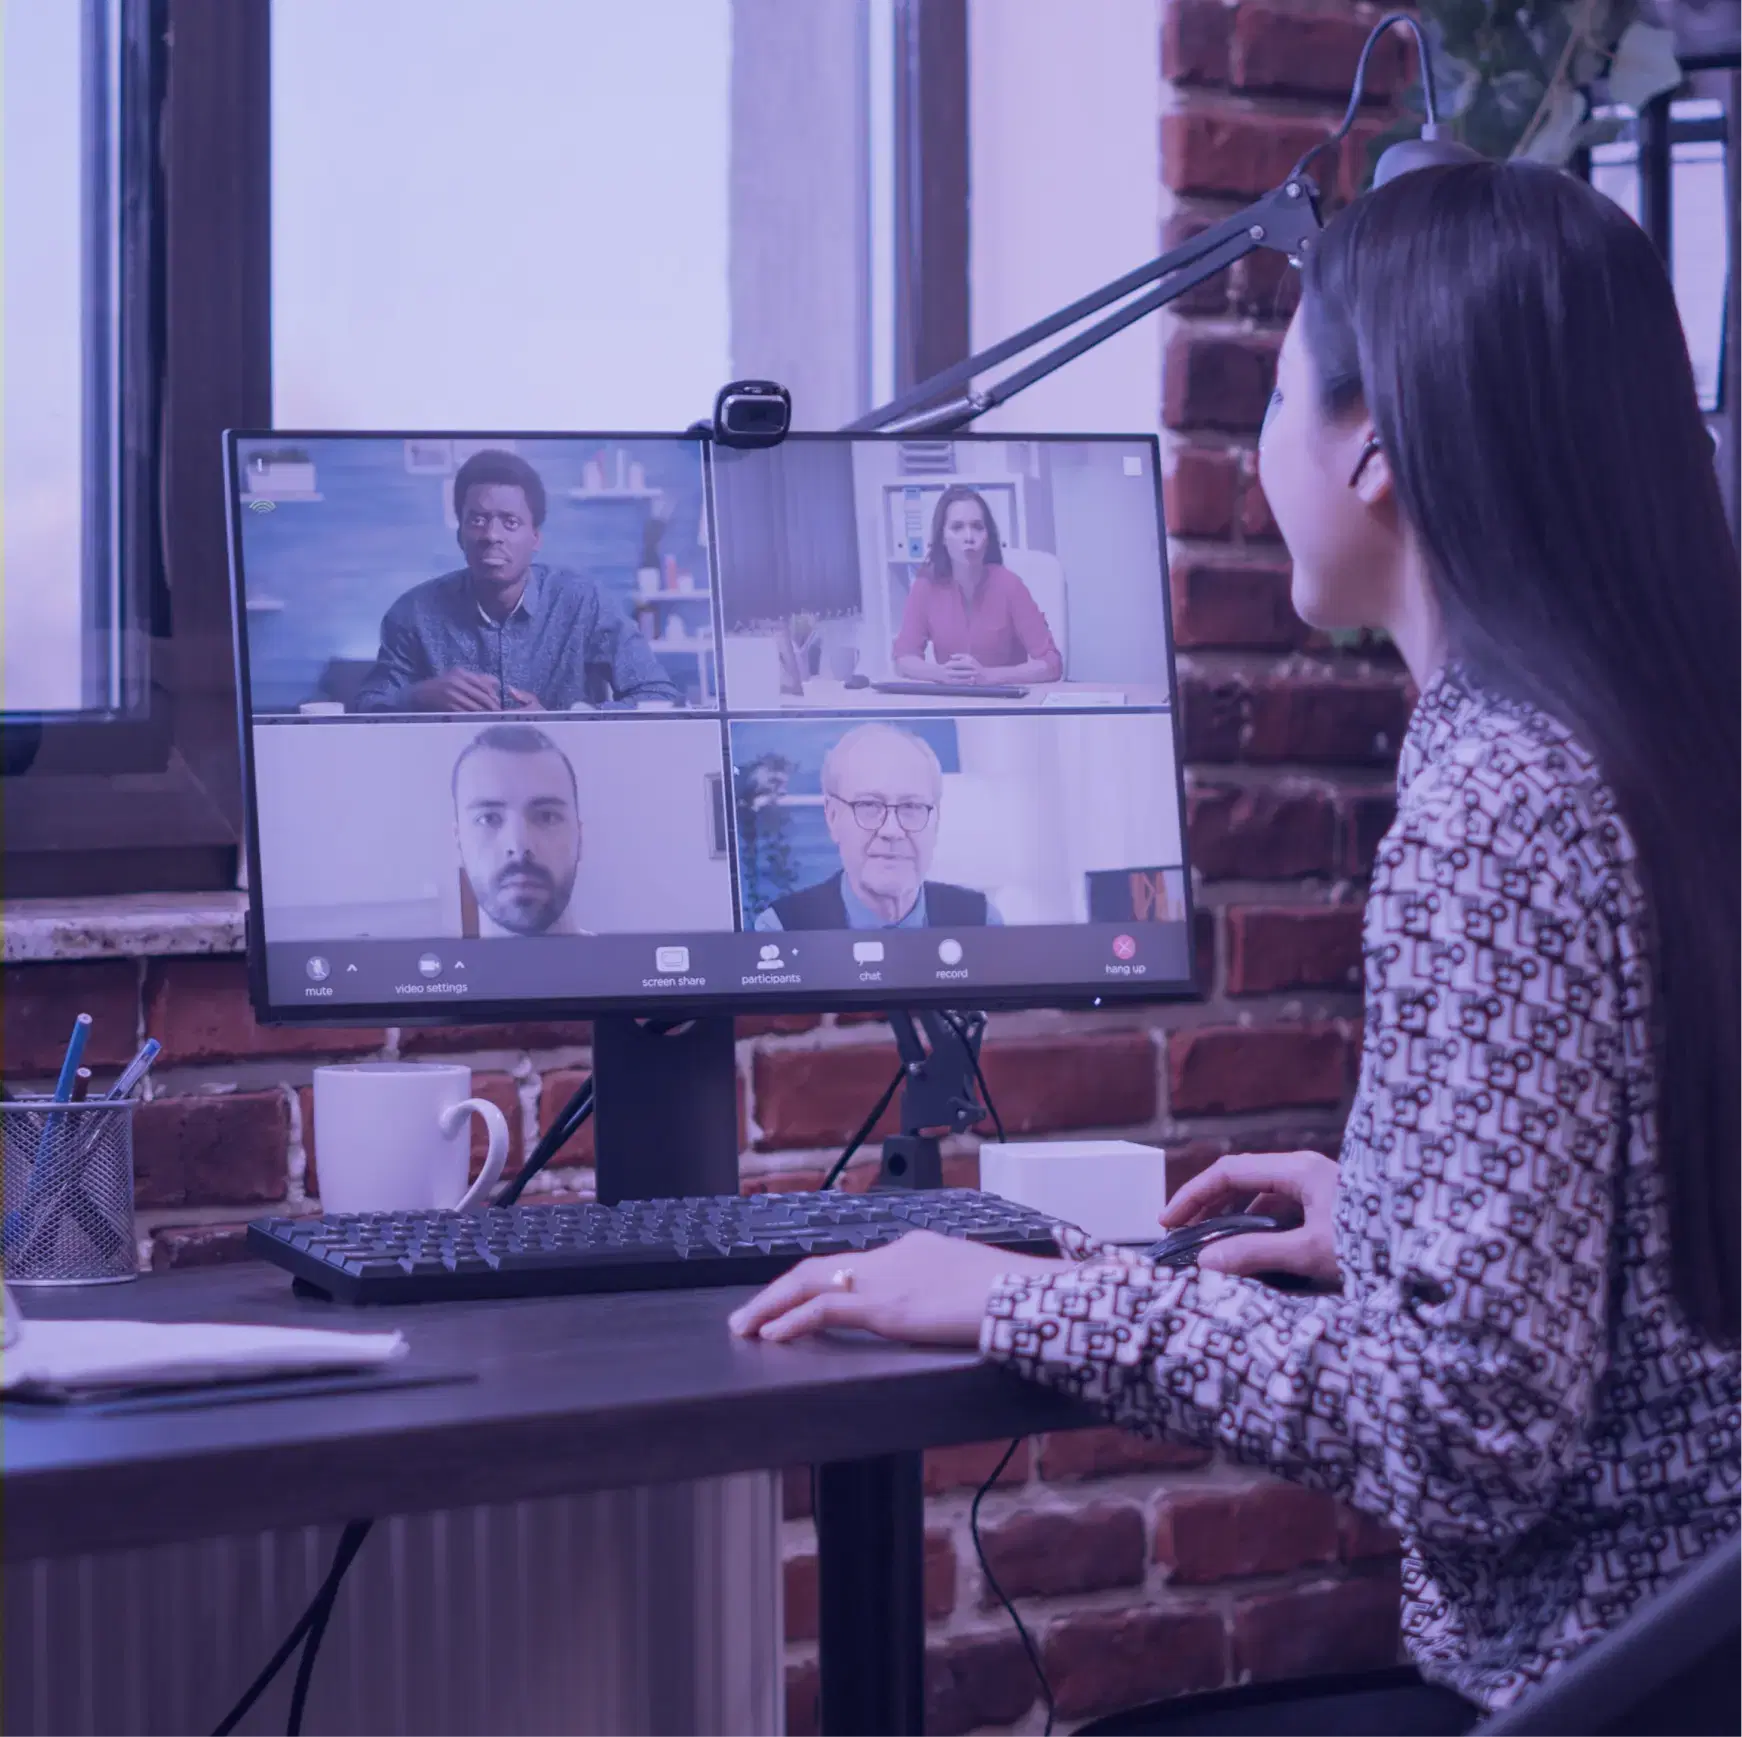 Video Conferencing Image decoration